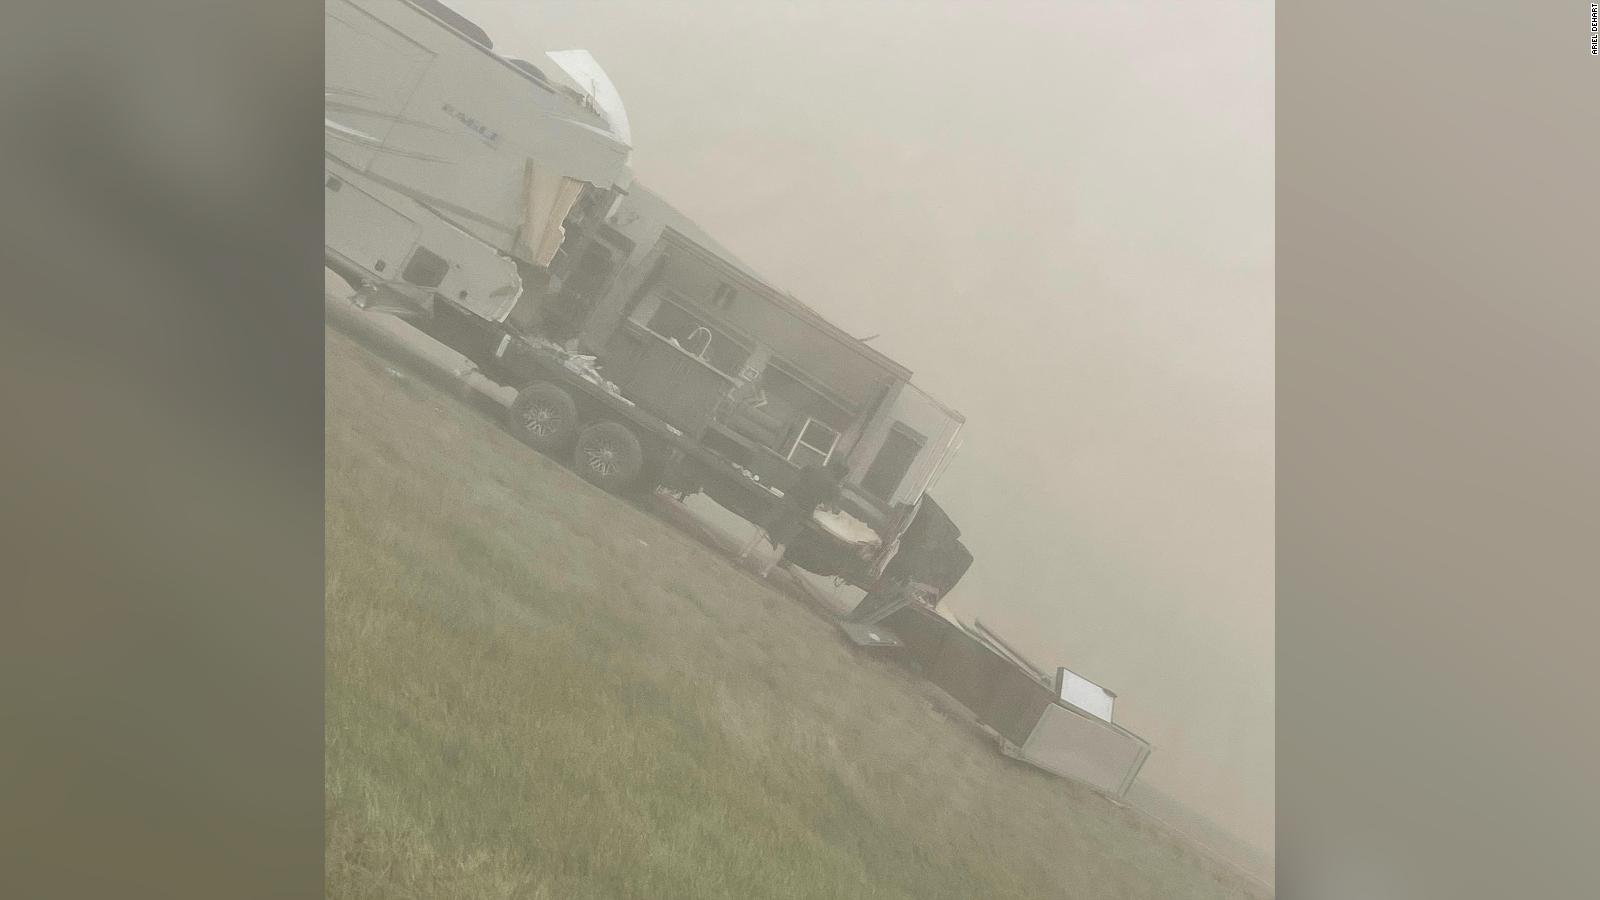 21 Vehicles Crash, Six Killed Due To Dust Storm In Montana